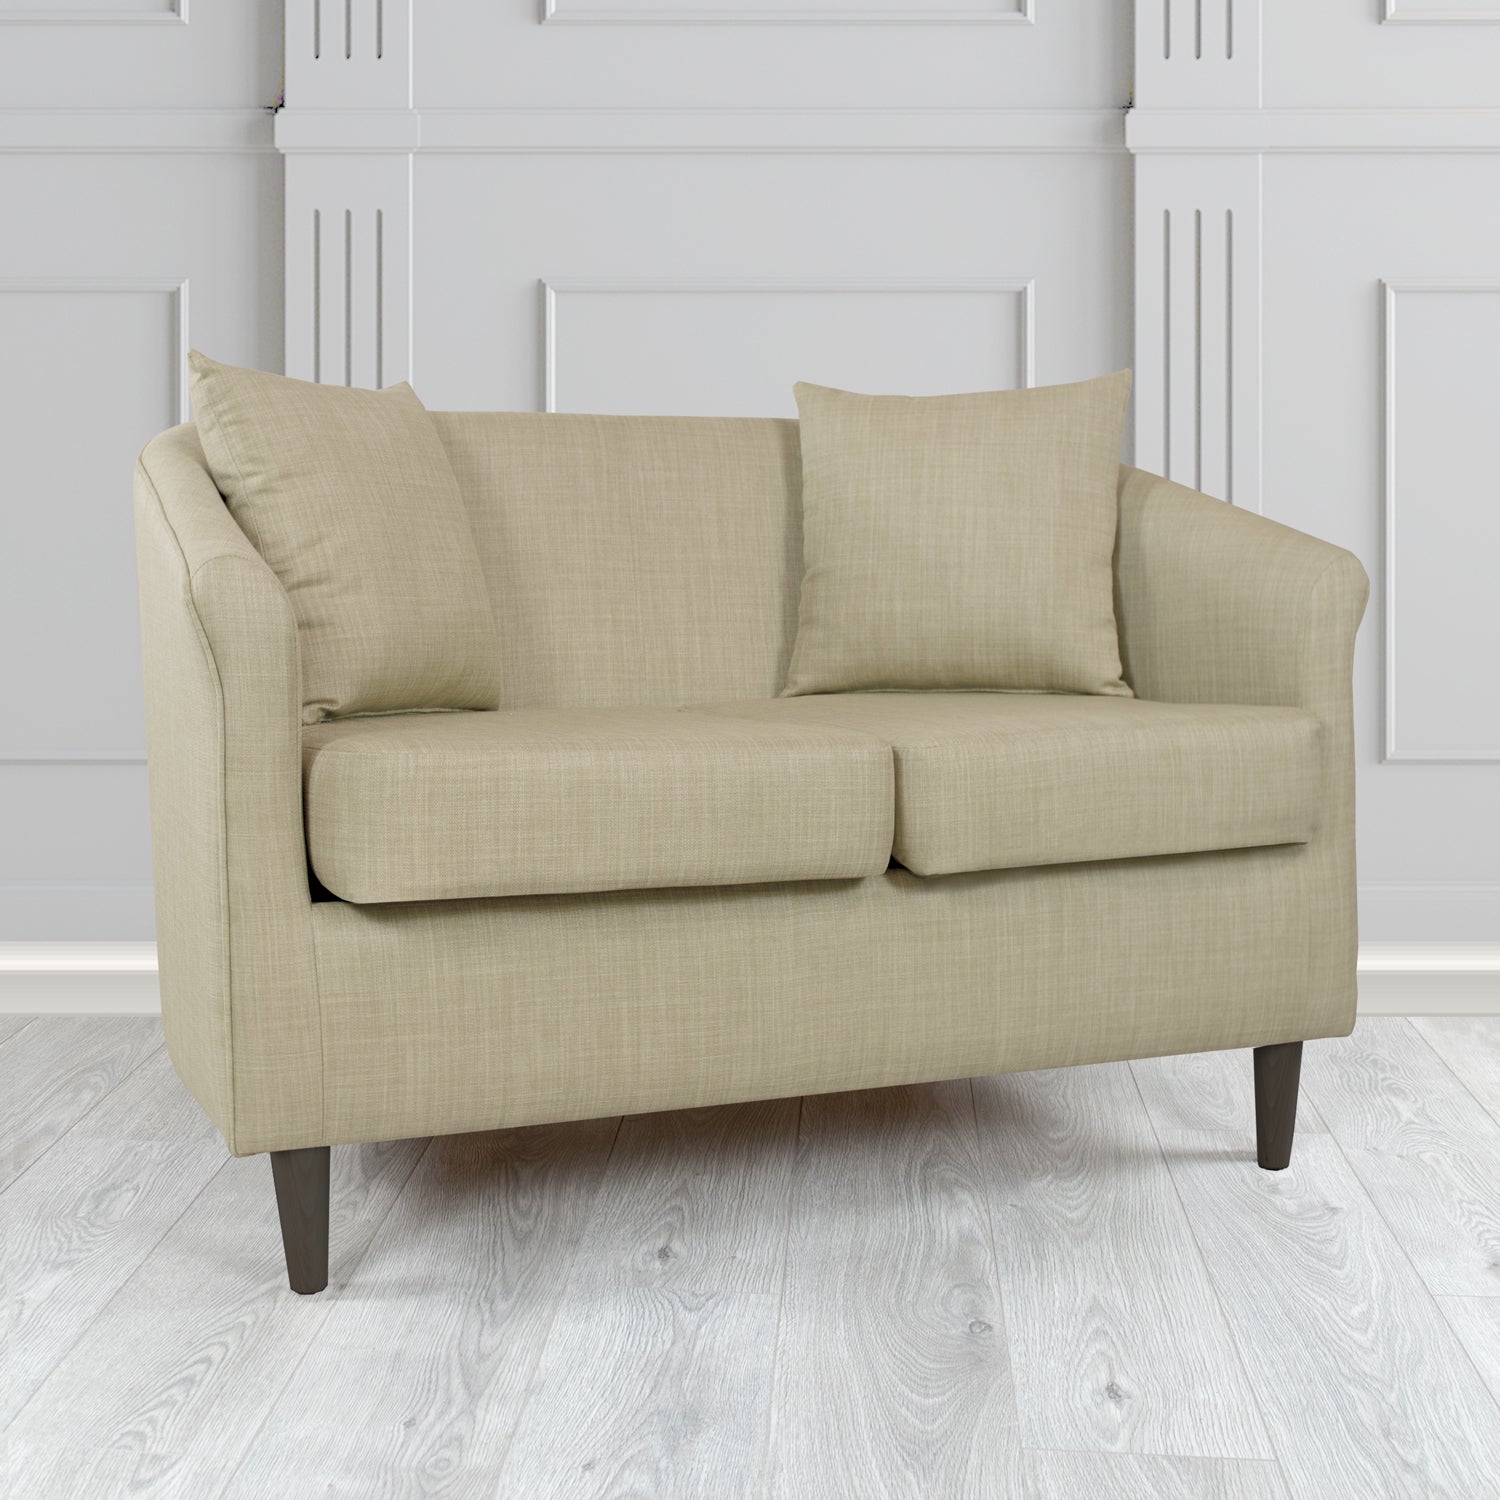 St Tropez Charles Fudge Plain Linen Fabric 2 Seater Tub Sofa with Scatter Cushions - The Tub Chair Shop